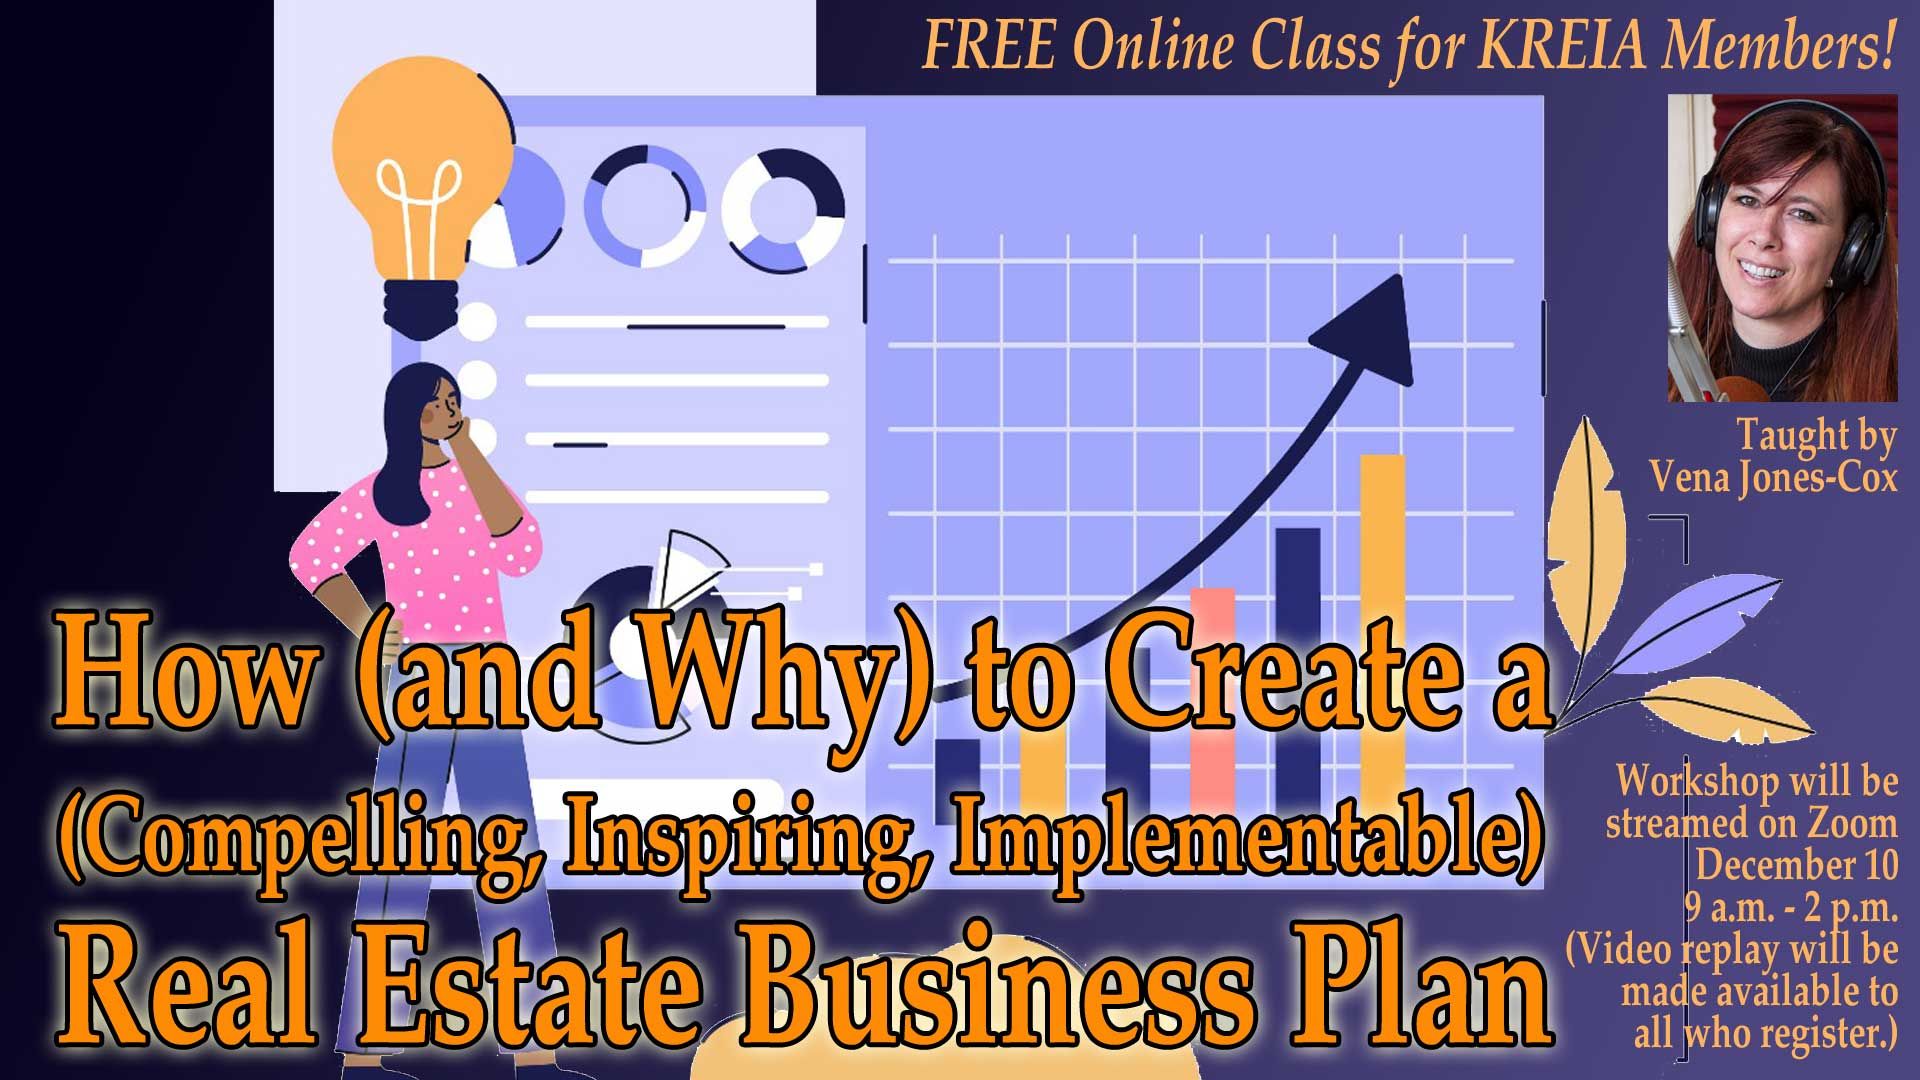 FREE class for KREIA members on how to create a business plan